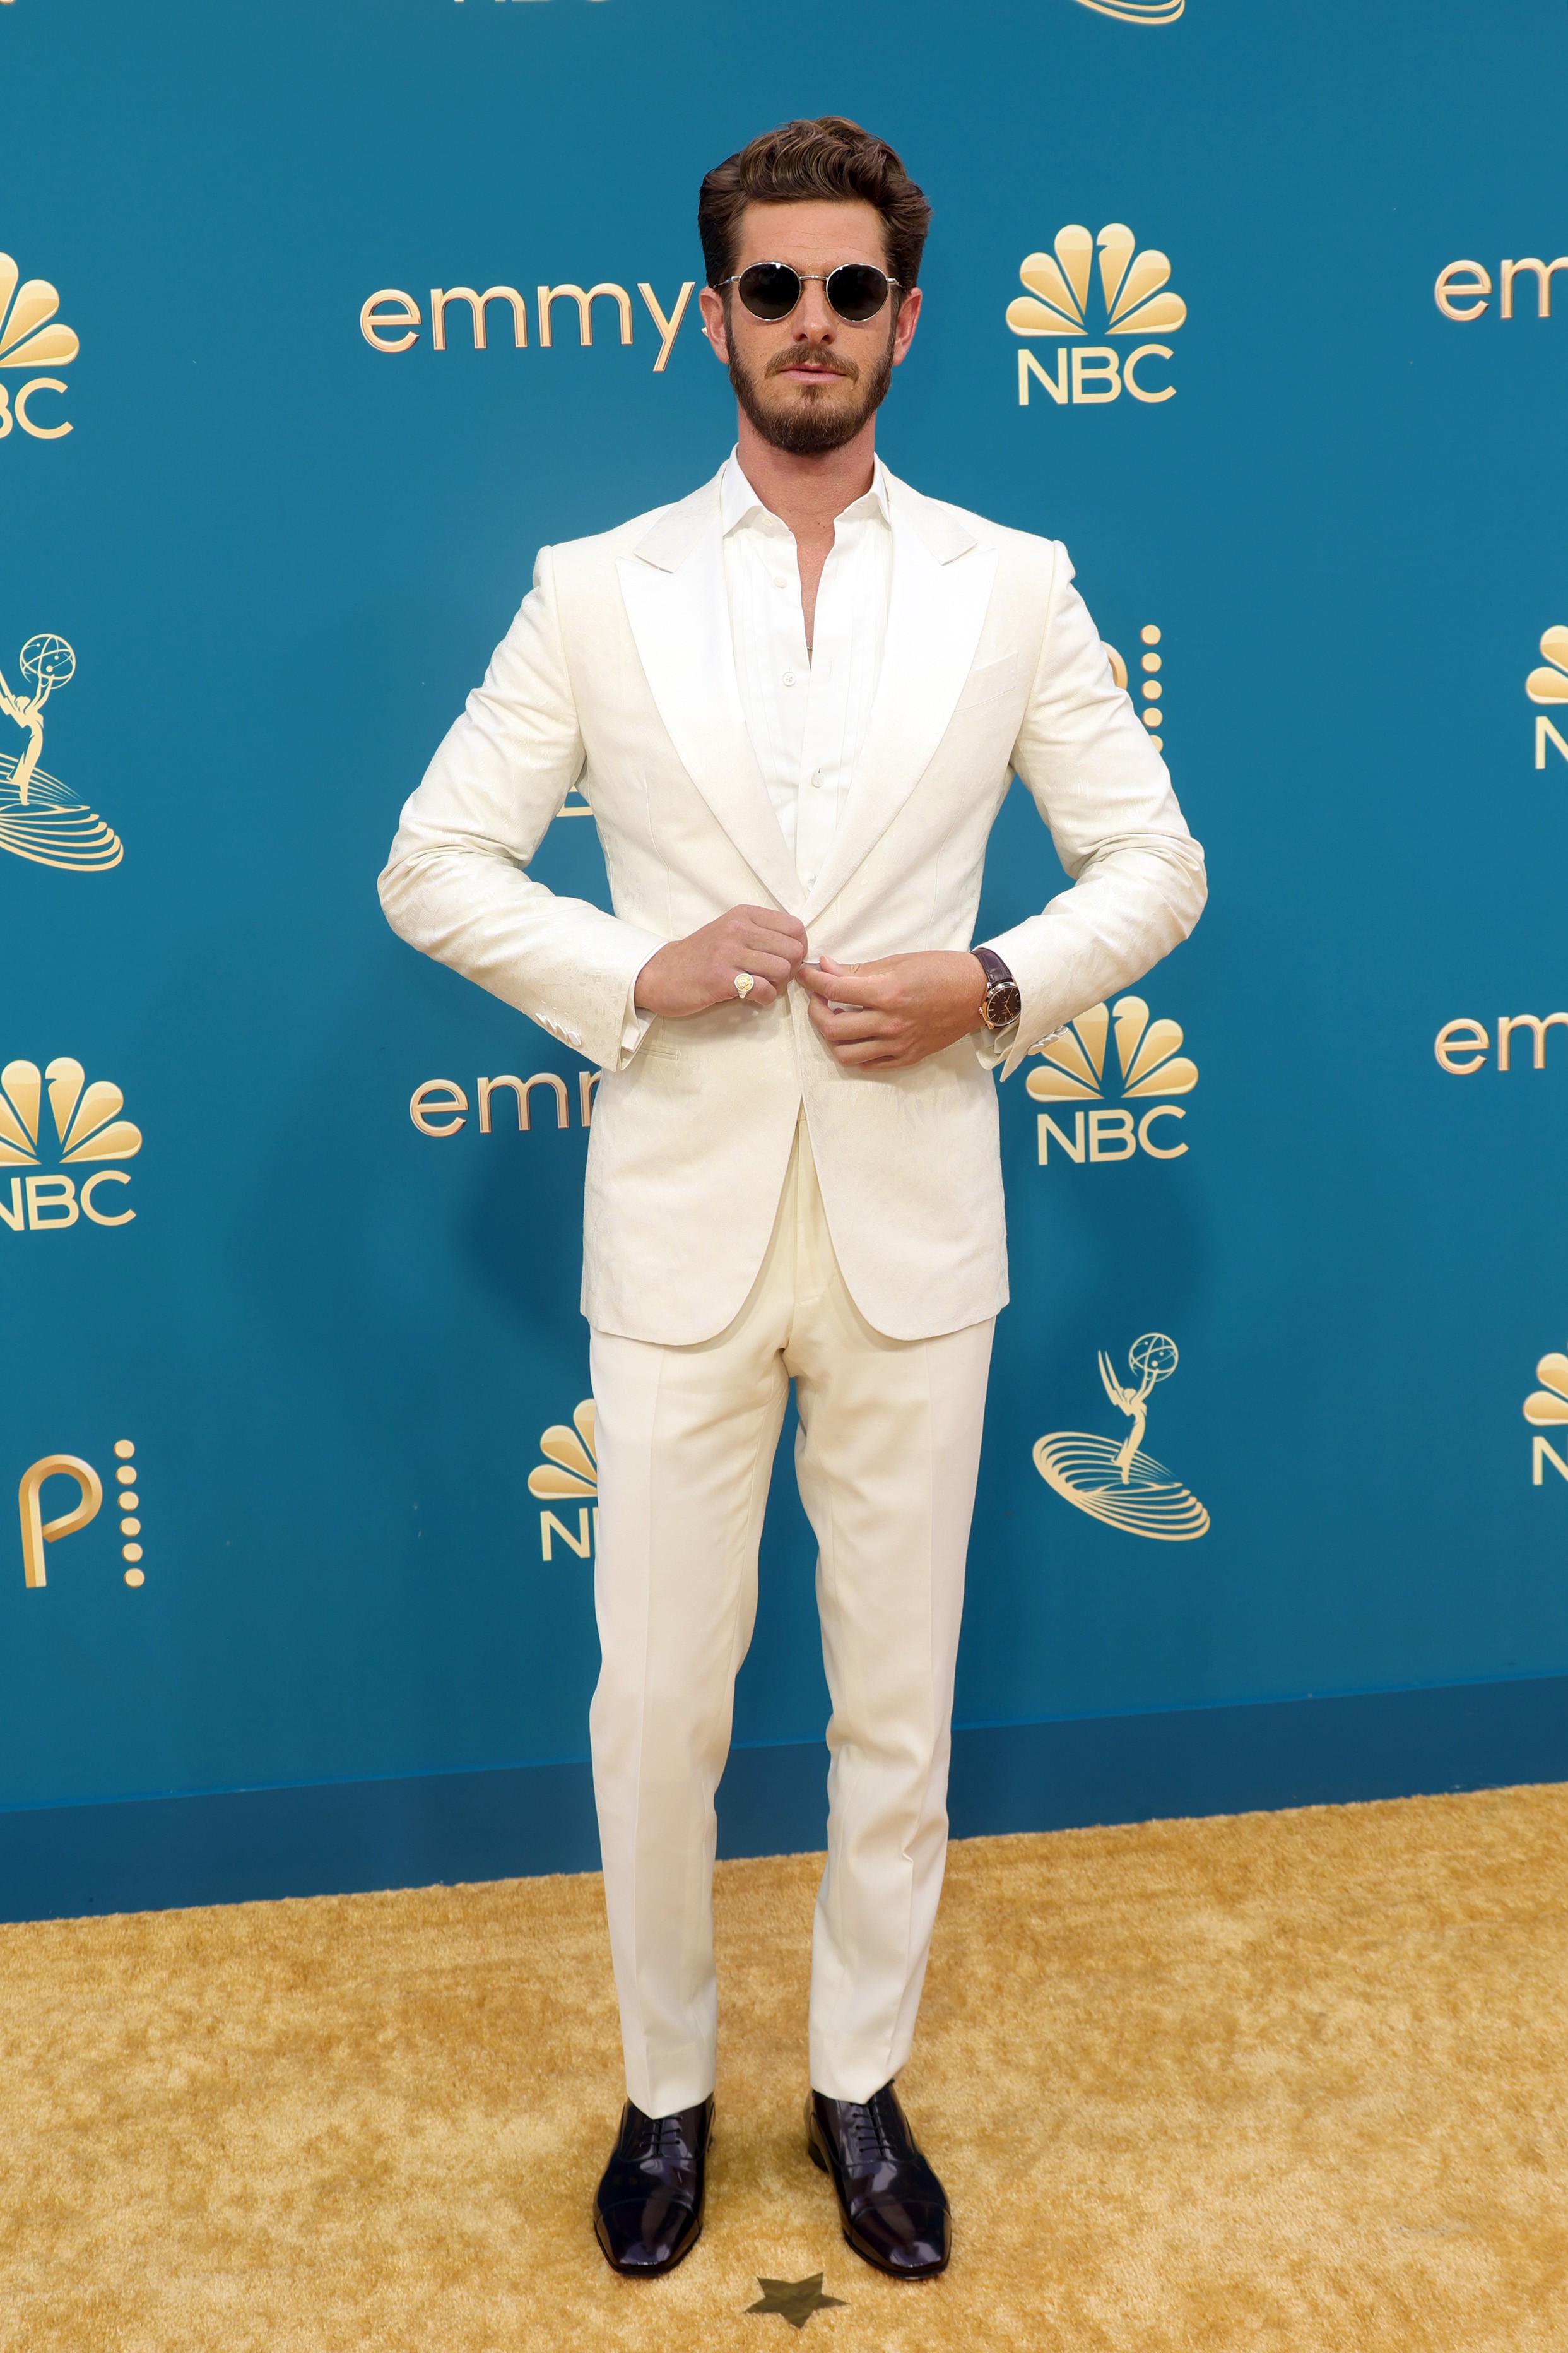 LOS ANGELES, CALIFORNIA - SEPTEMBER 12: Andrew Garfield attends the 74th Primetime Emmys at Microsoft Theater on September 12, 2022 in Los Angeles, California. (Photo by Momodu Mansaray/Getty Images) (Foto: Getty Images)